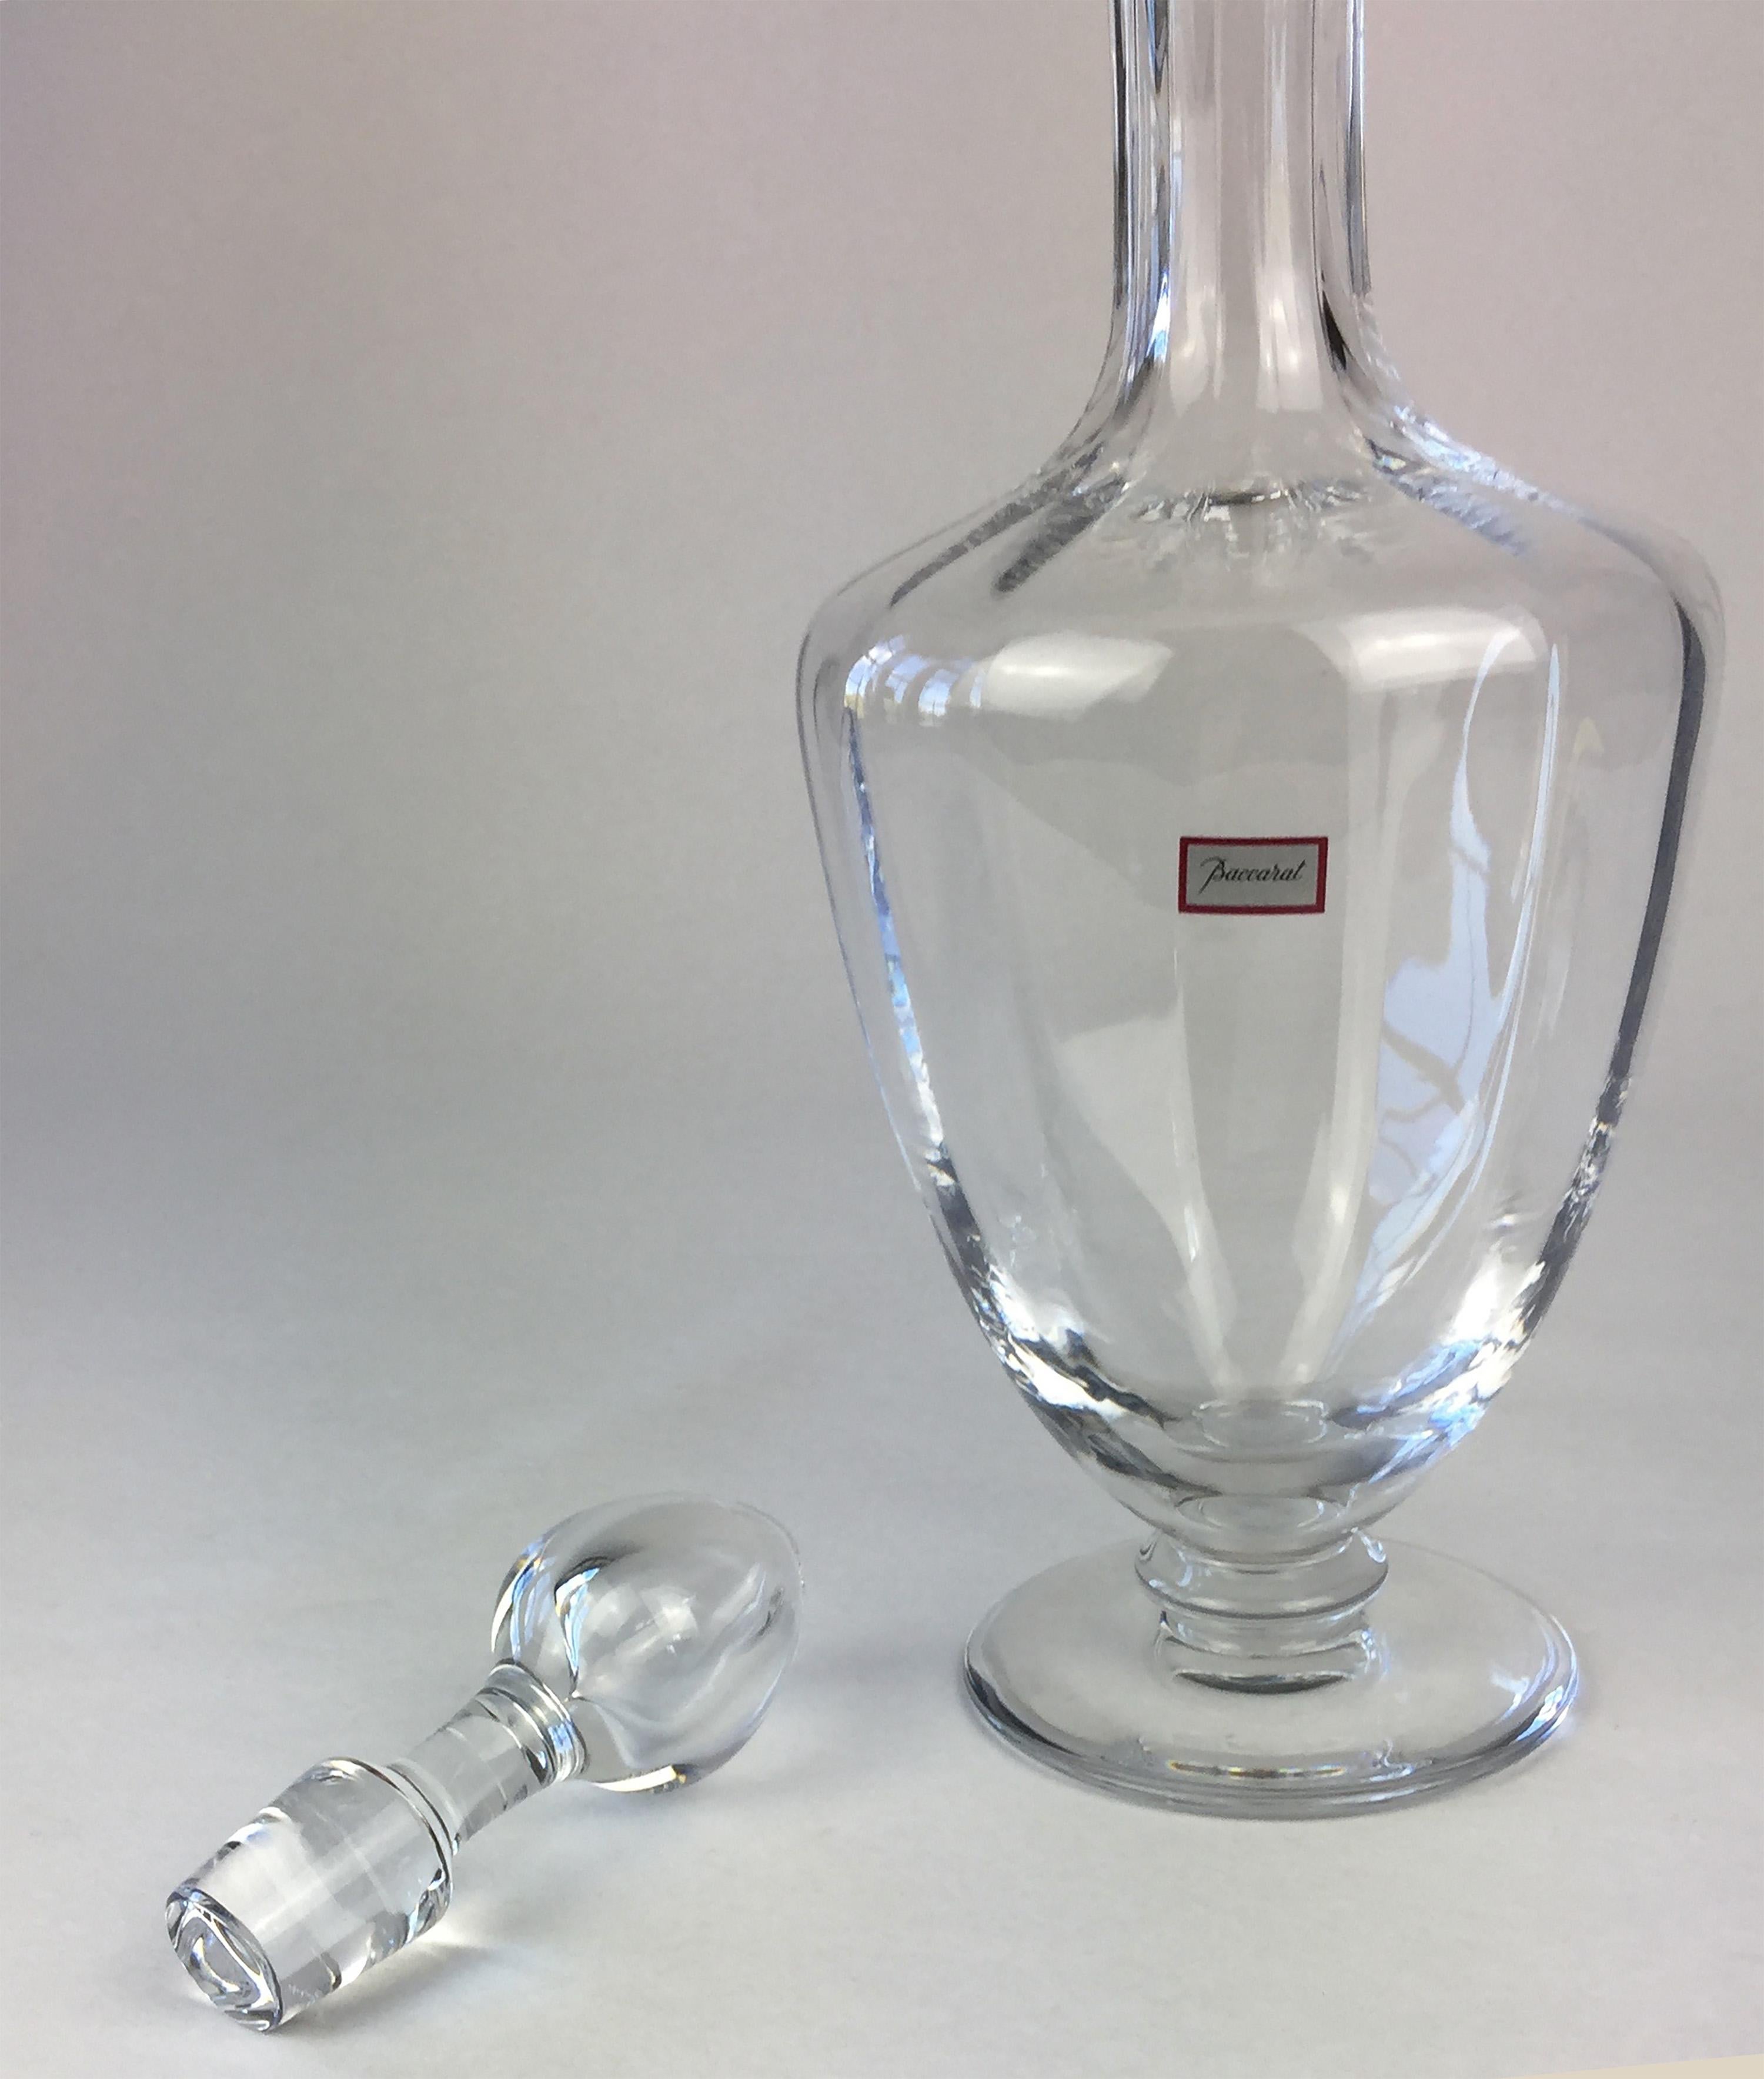 Set of four Baccarat Capris crystal identical mint condition decanters some with original labels, circa 2000 no longer in production.